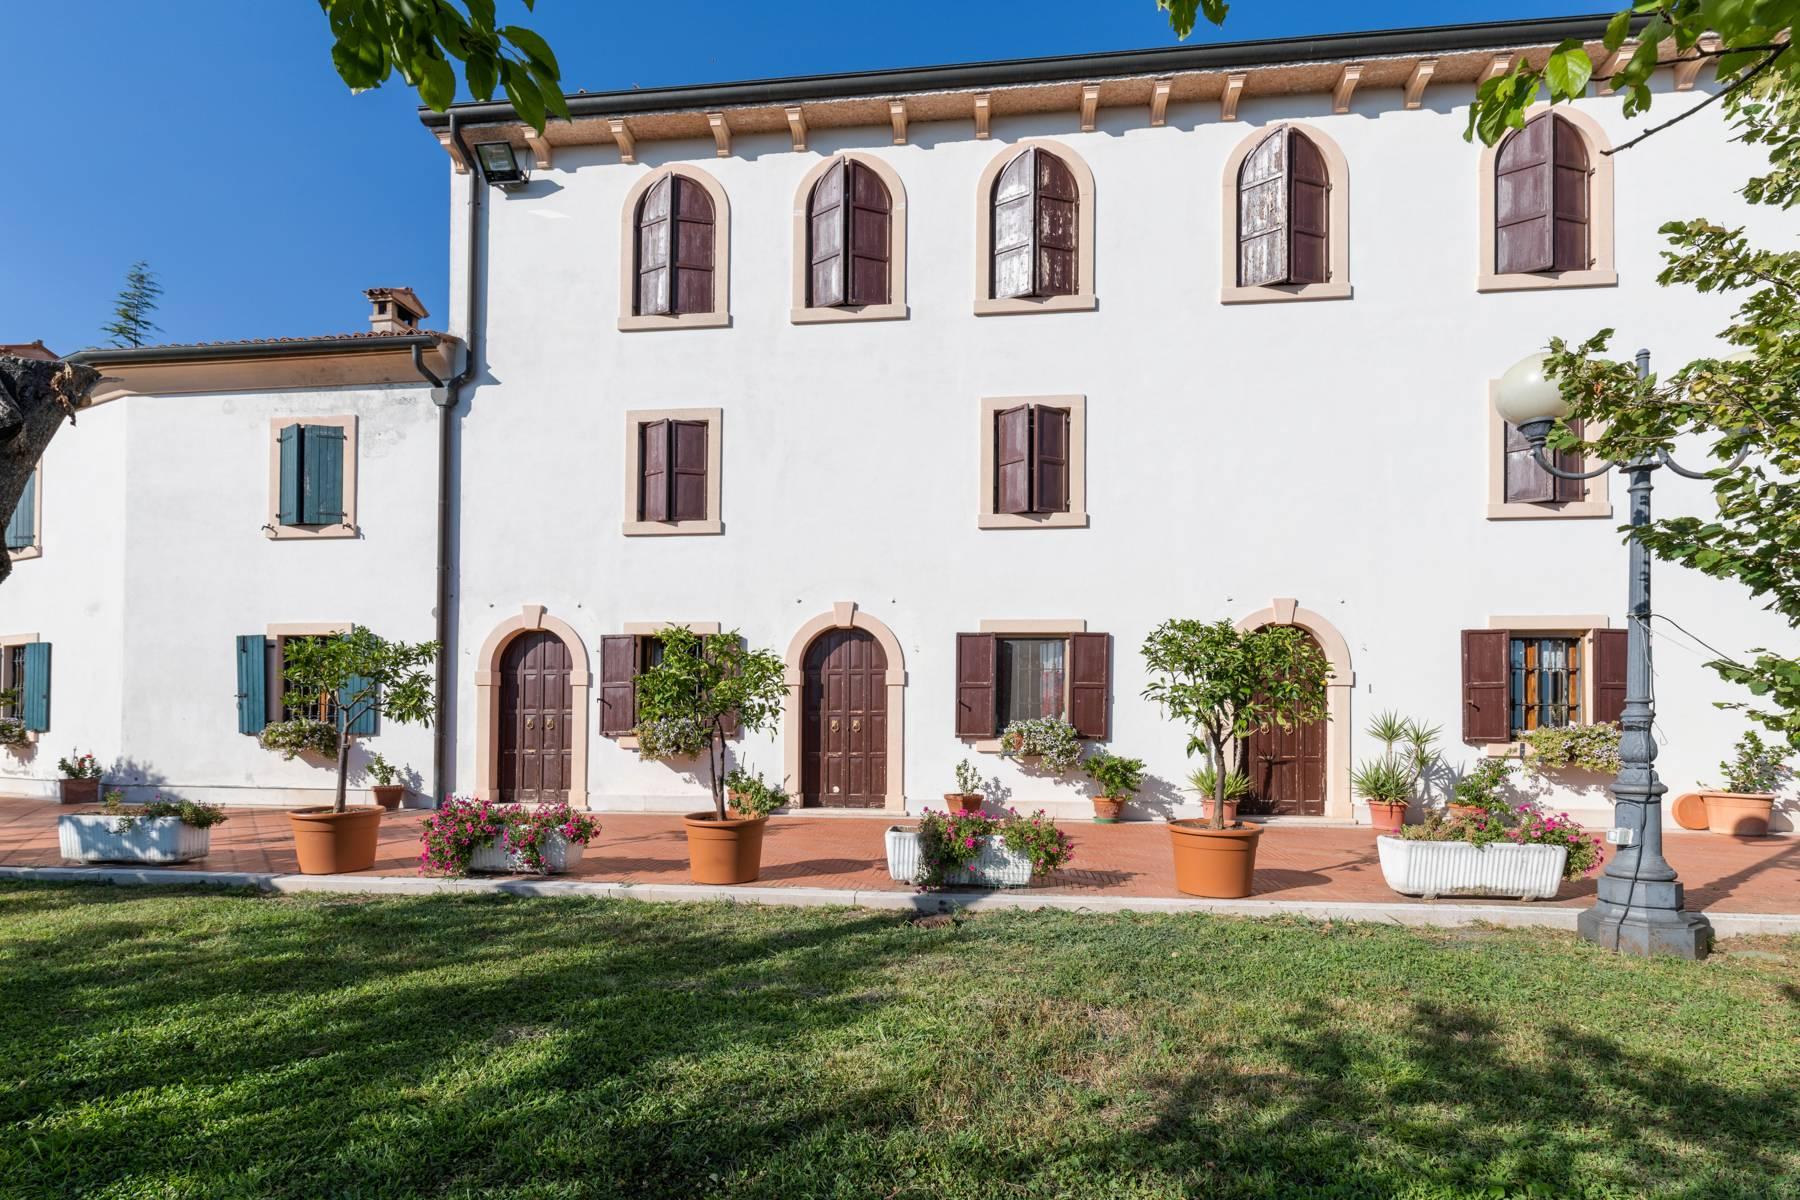 Historic country villa with swimming pool, tennis court and estate on the hills of Verona - 5